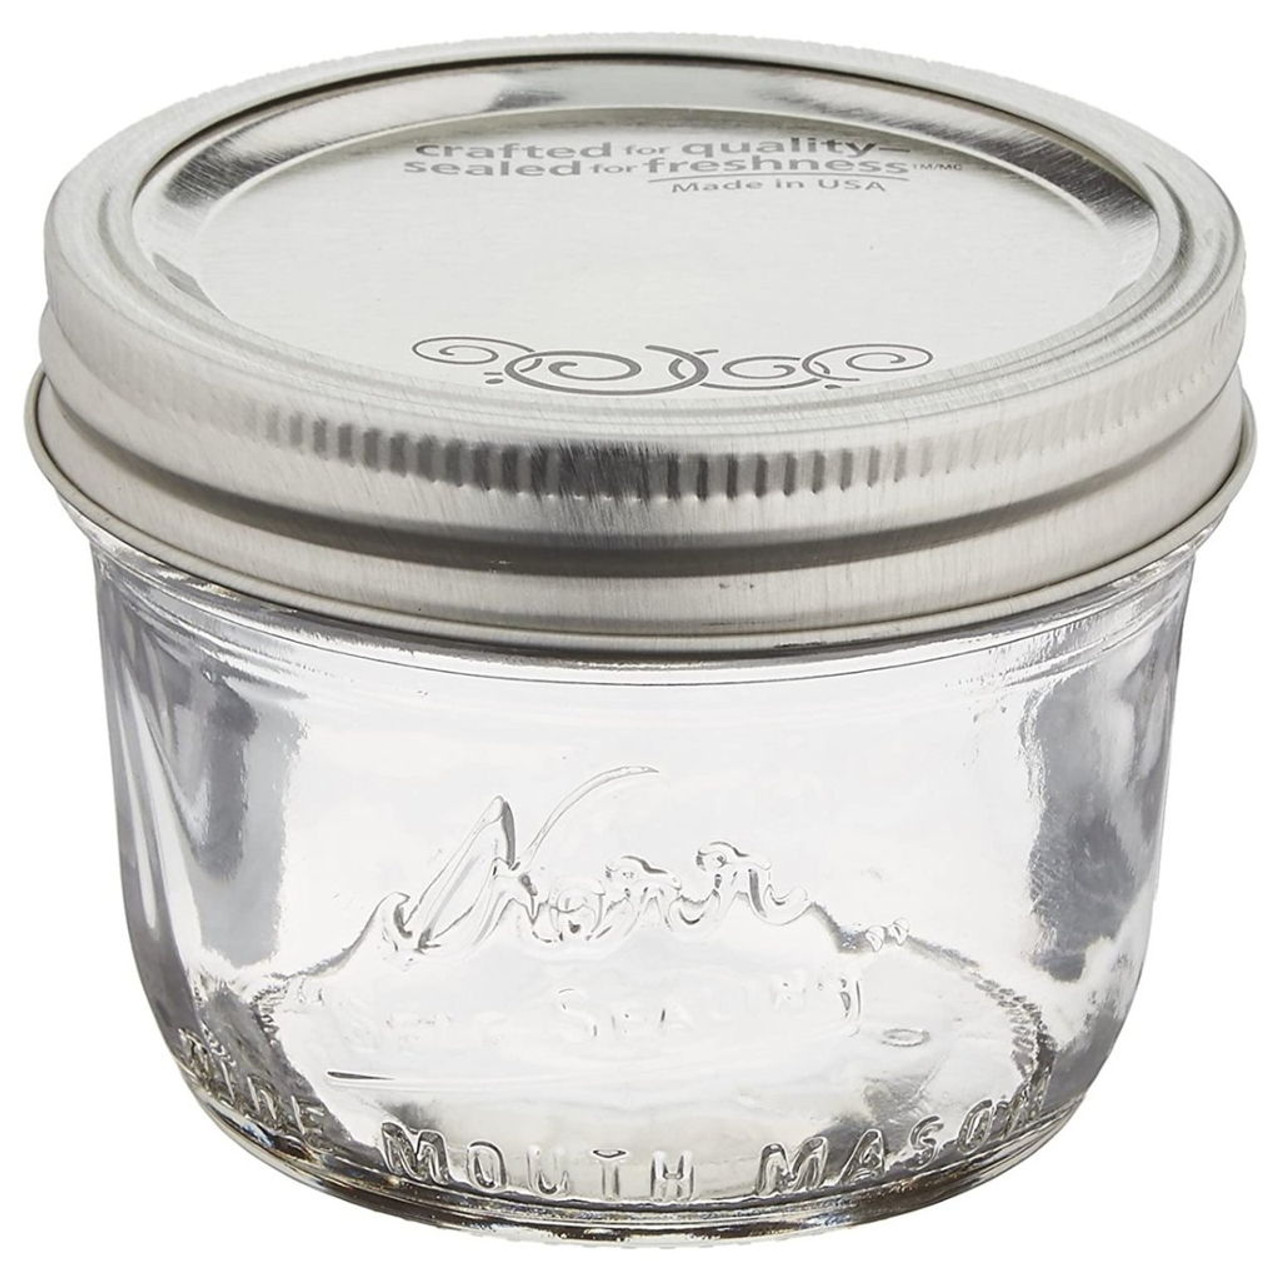 Kerr - Jars Wide Mouth 8 oz -12 Count